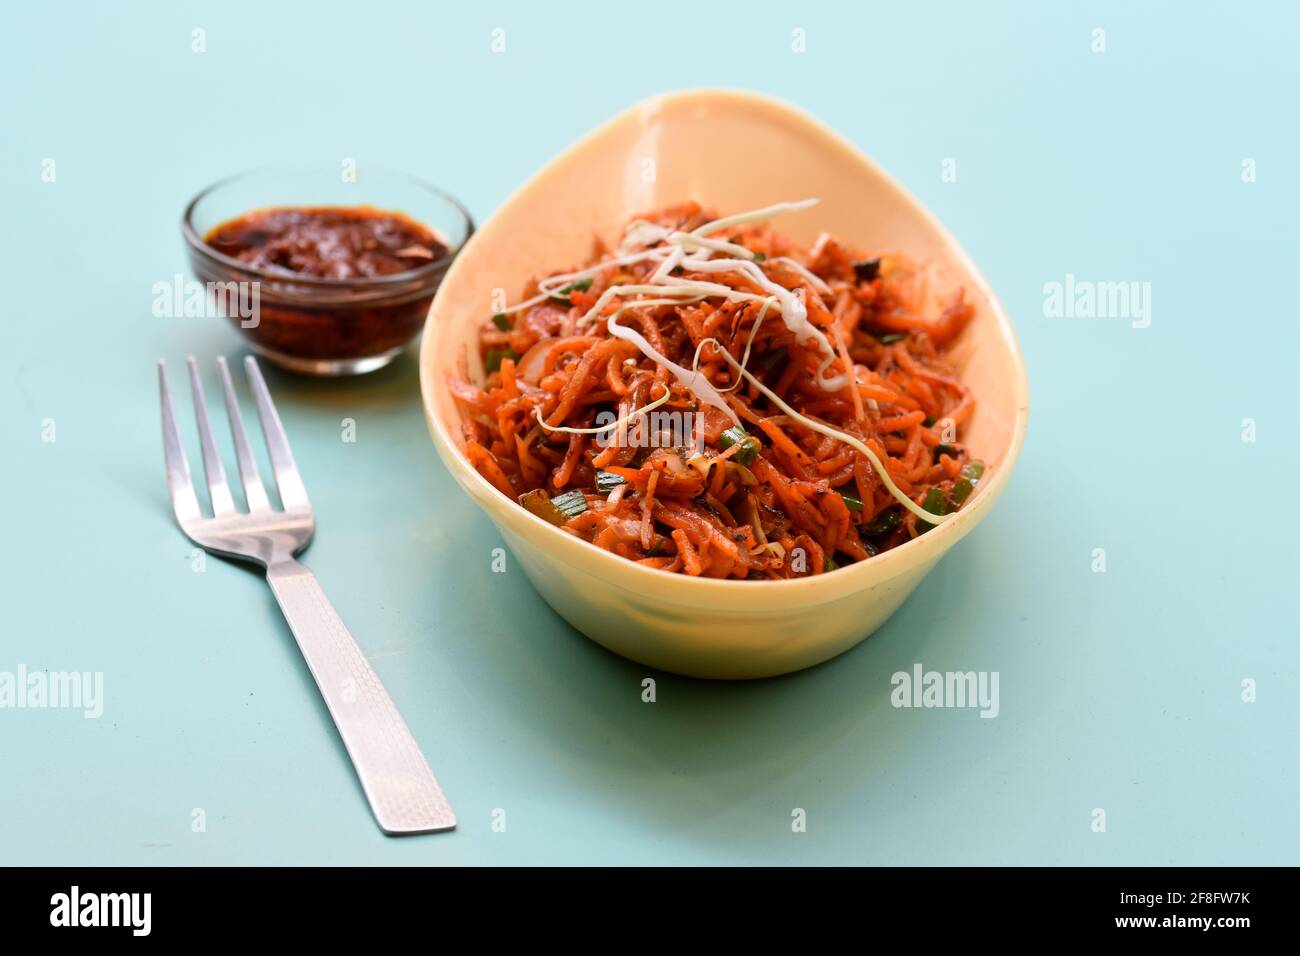 Schezwan Noodles or Manchurian Hakka or vegetable Hakka Noodles or chow mein indochinese food served in a bowl Indian Chinese food, Stock Photo